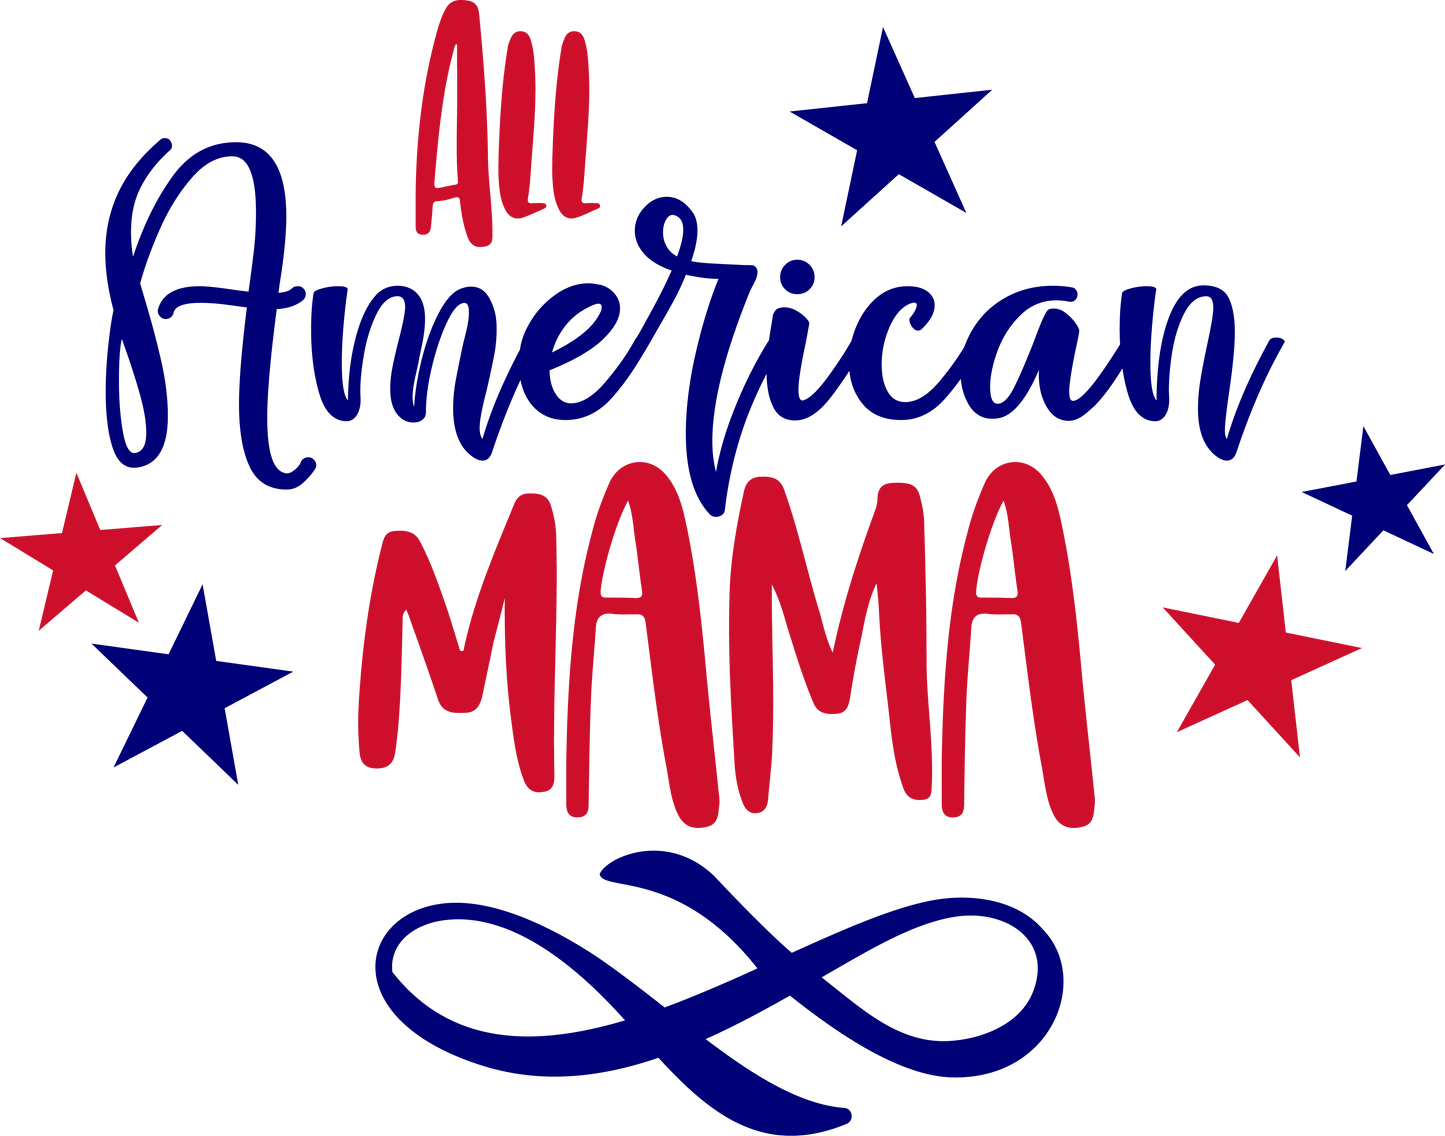 All American Mama 4th of July Crew neck T-Shirt Style #2